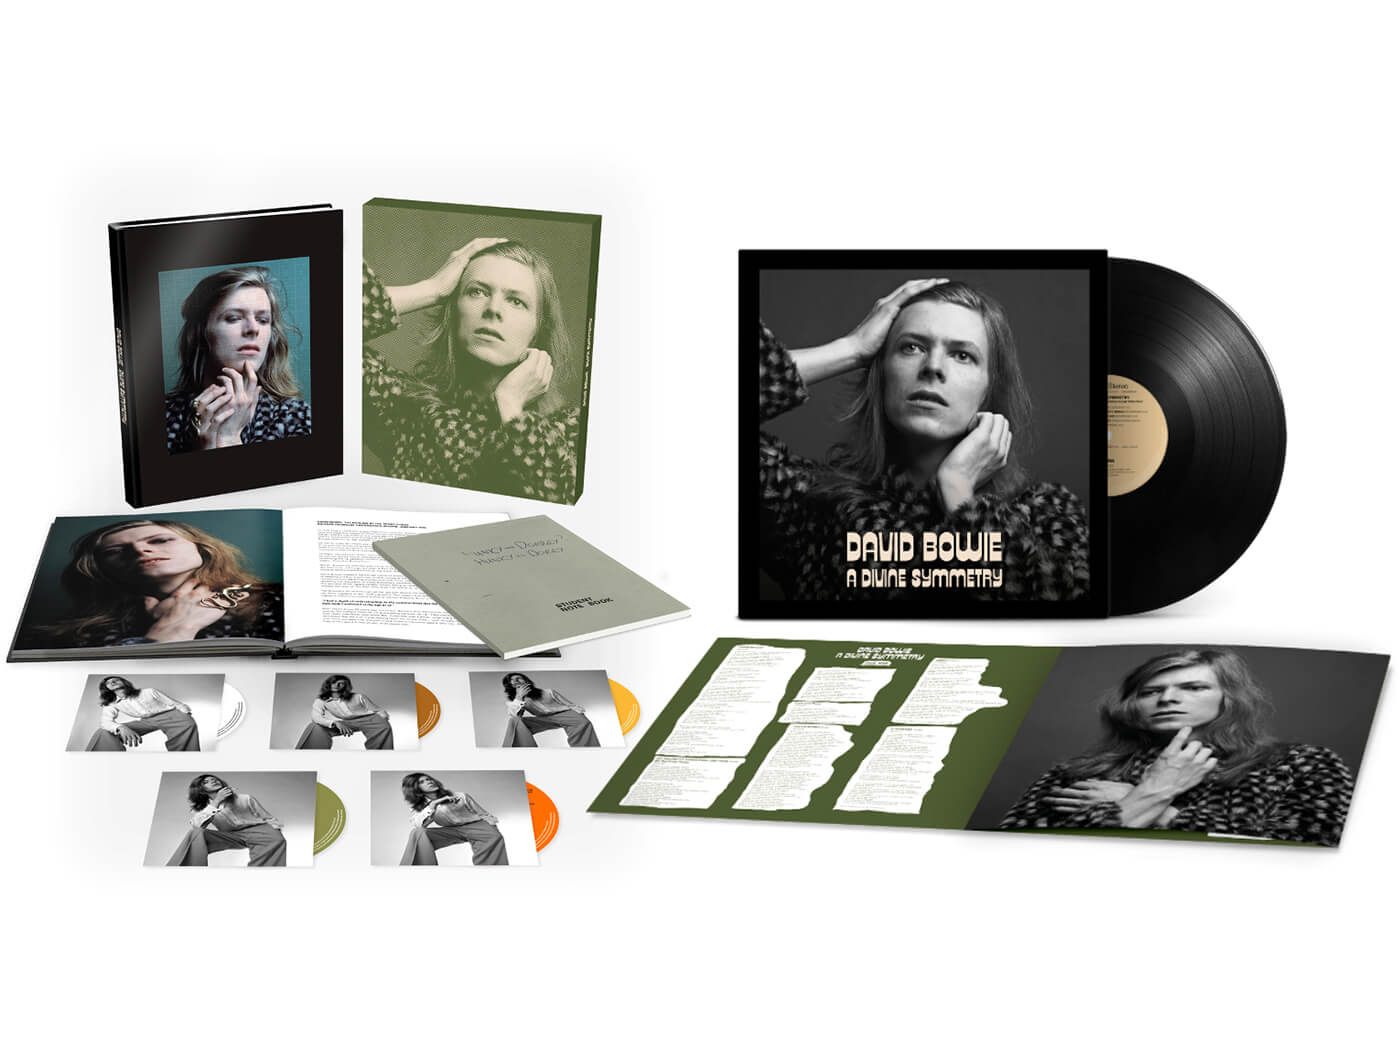 Hear a version of “Kooks” from David Bowie’s upcoming Hunky Dory box set, Divine Symmetry